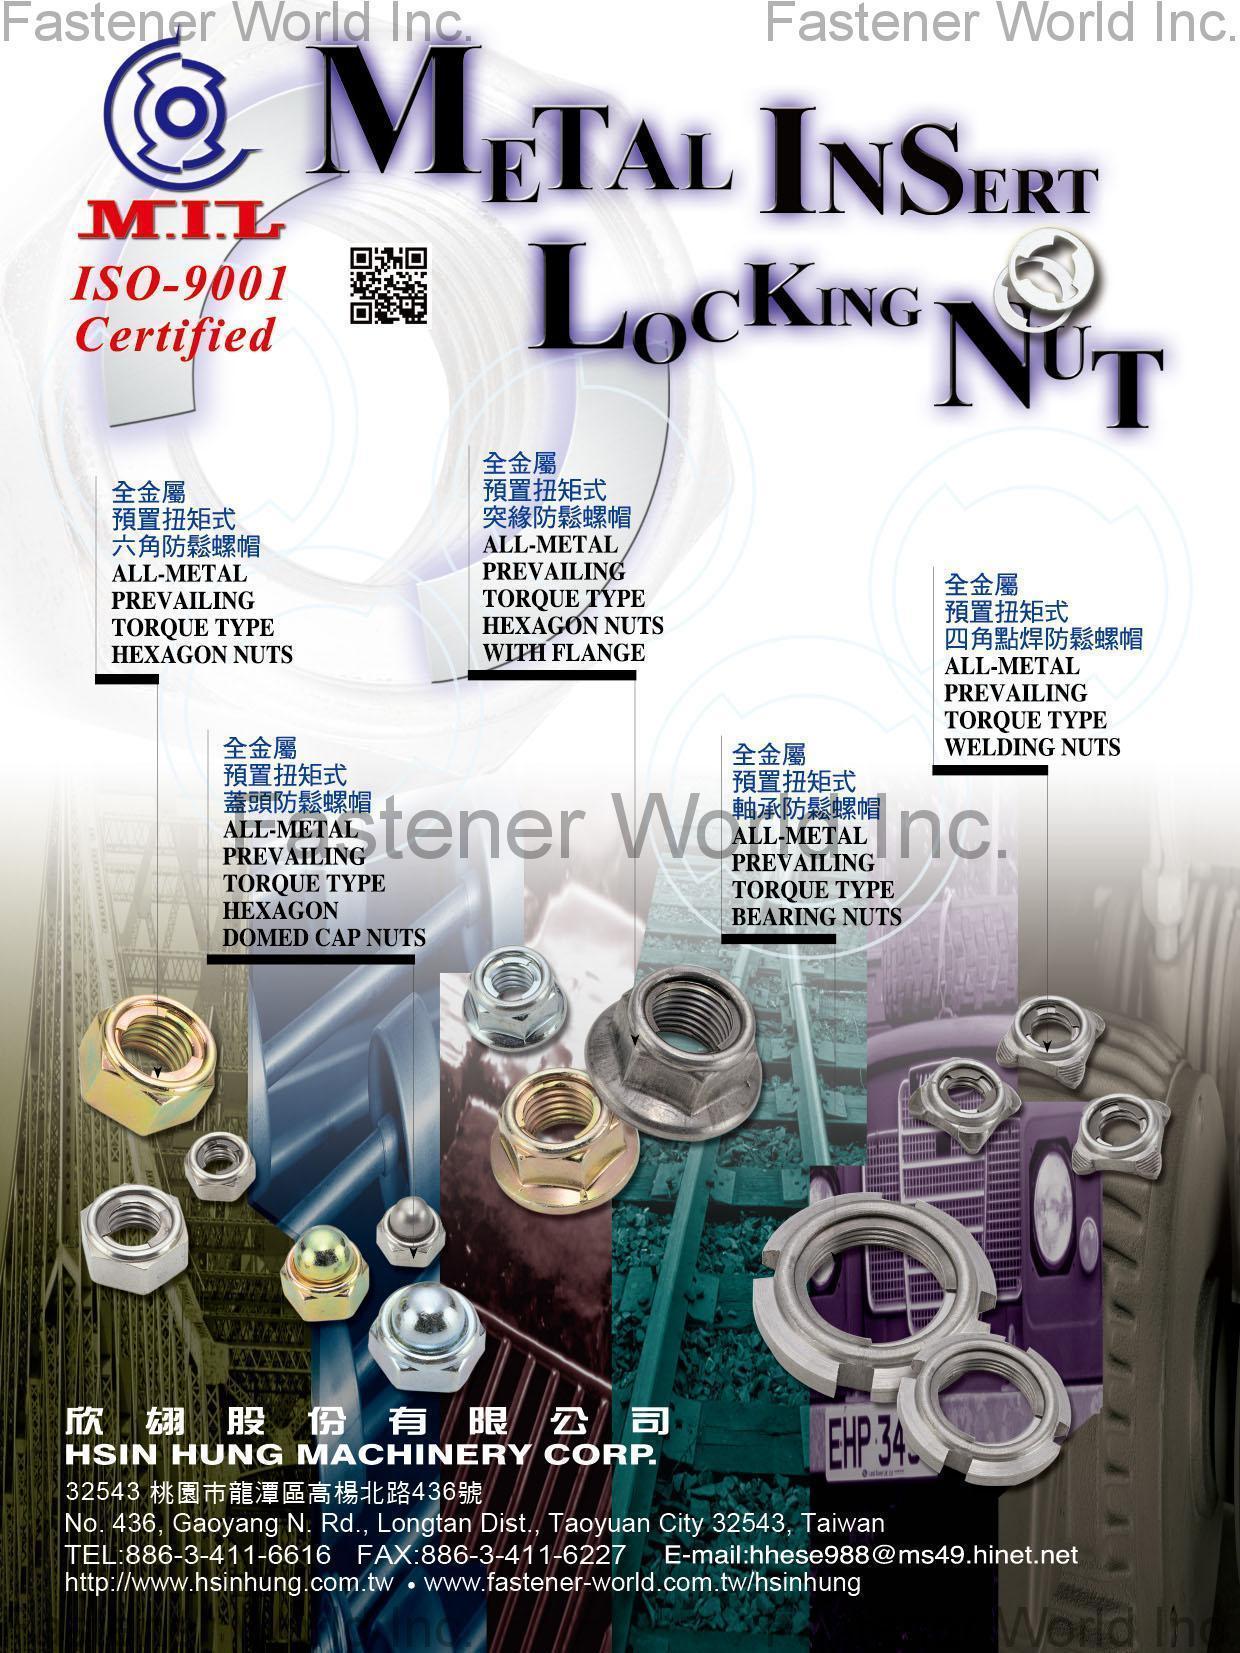 HSIN HUNG MACHINERY CORP.  , All-Metal Prevailing Torque Type Hexagon Nuts, All-Metal Prevailing Torque Type Hexagon Nuts With Flange, ALL-Metal Prevailing Torque Type Hexagon Domed Cap Nuts, All-Metal Prevailing Torque Type Bearing Nuts, All-Metal Prevailing Torque Type Welding Nuts , Hexagon Nuts